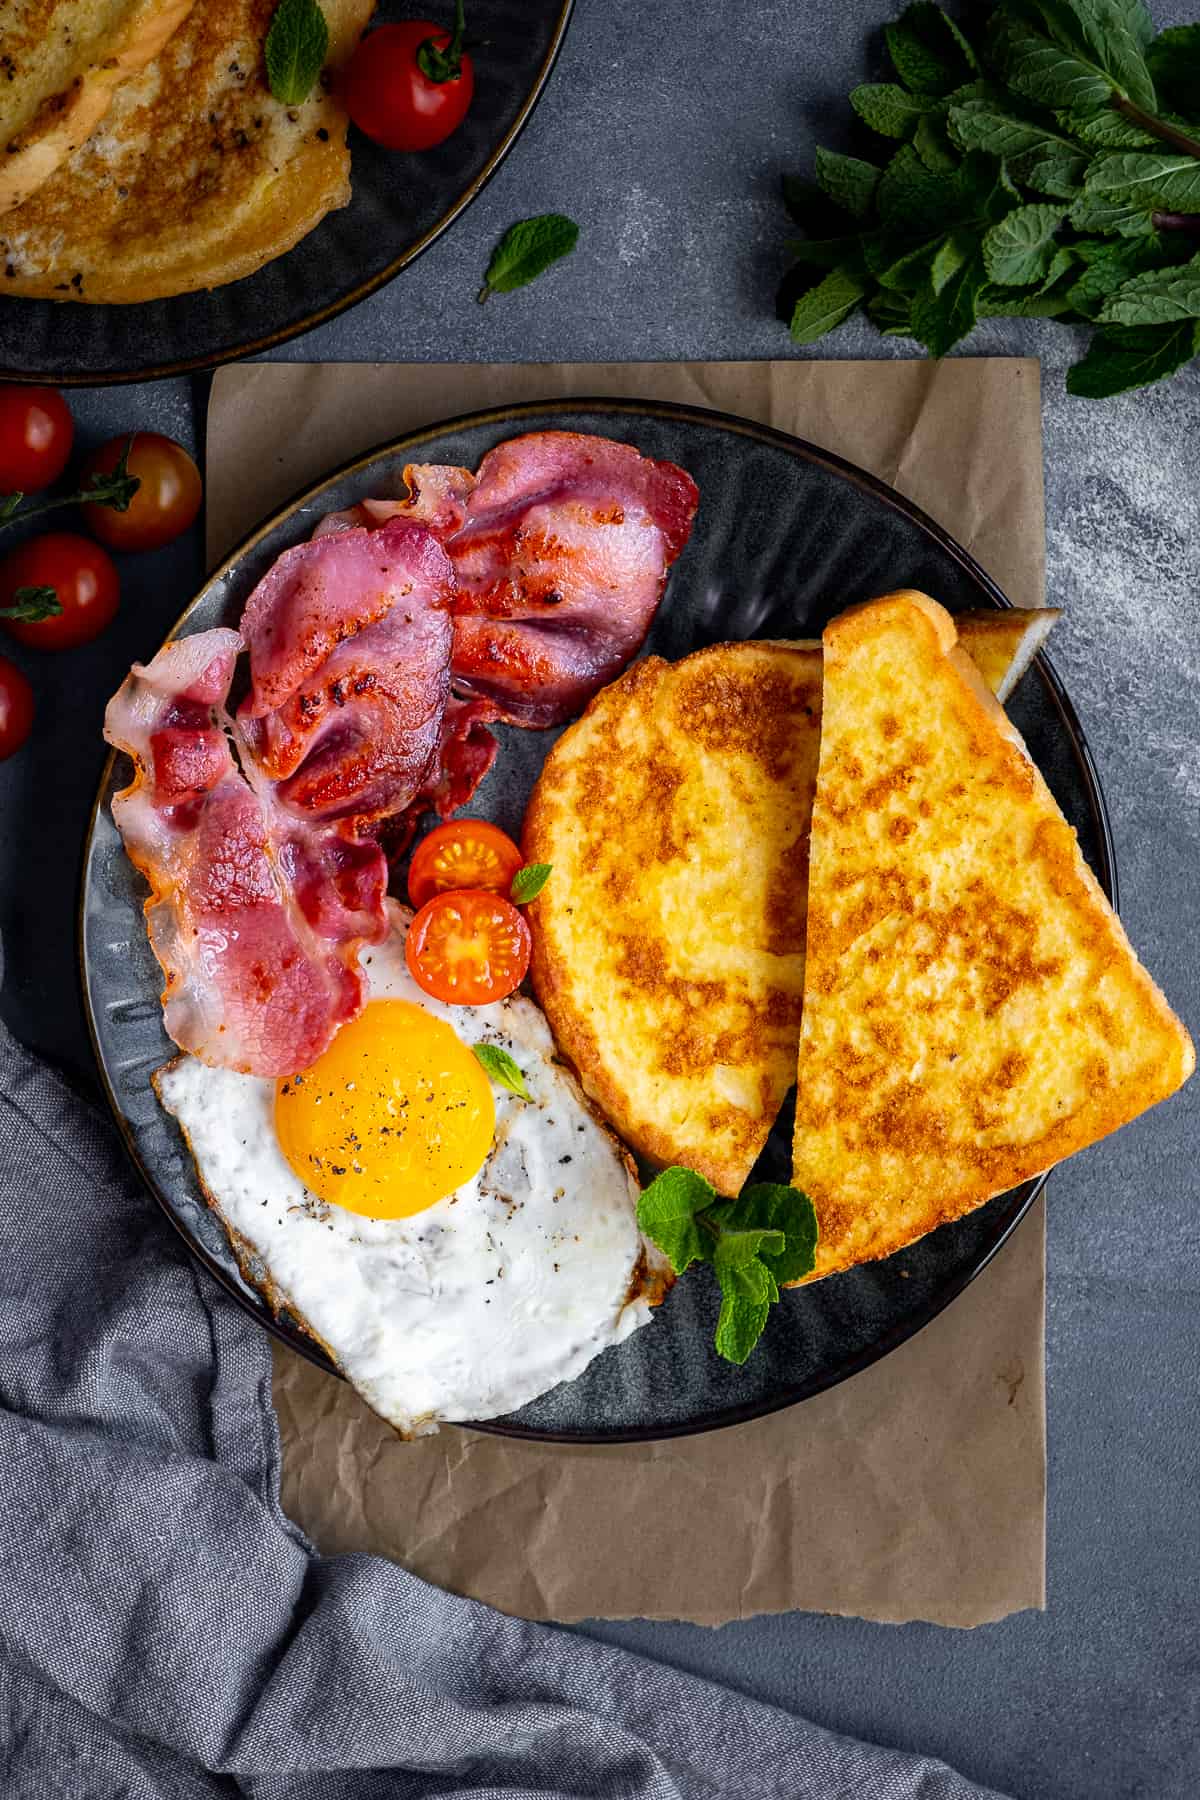 Eggy bread sliced in half served with bacon, fried egg and tomatoes on a dark plate.